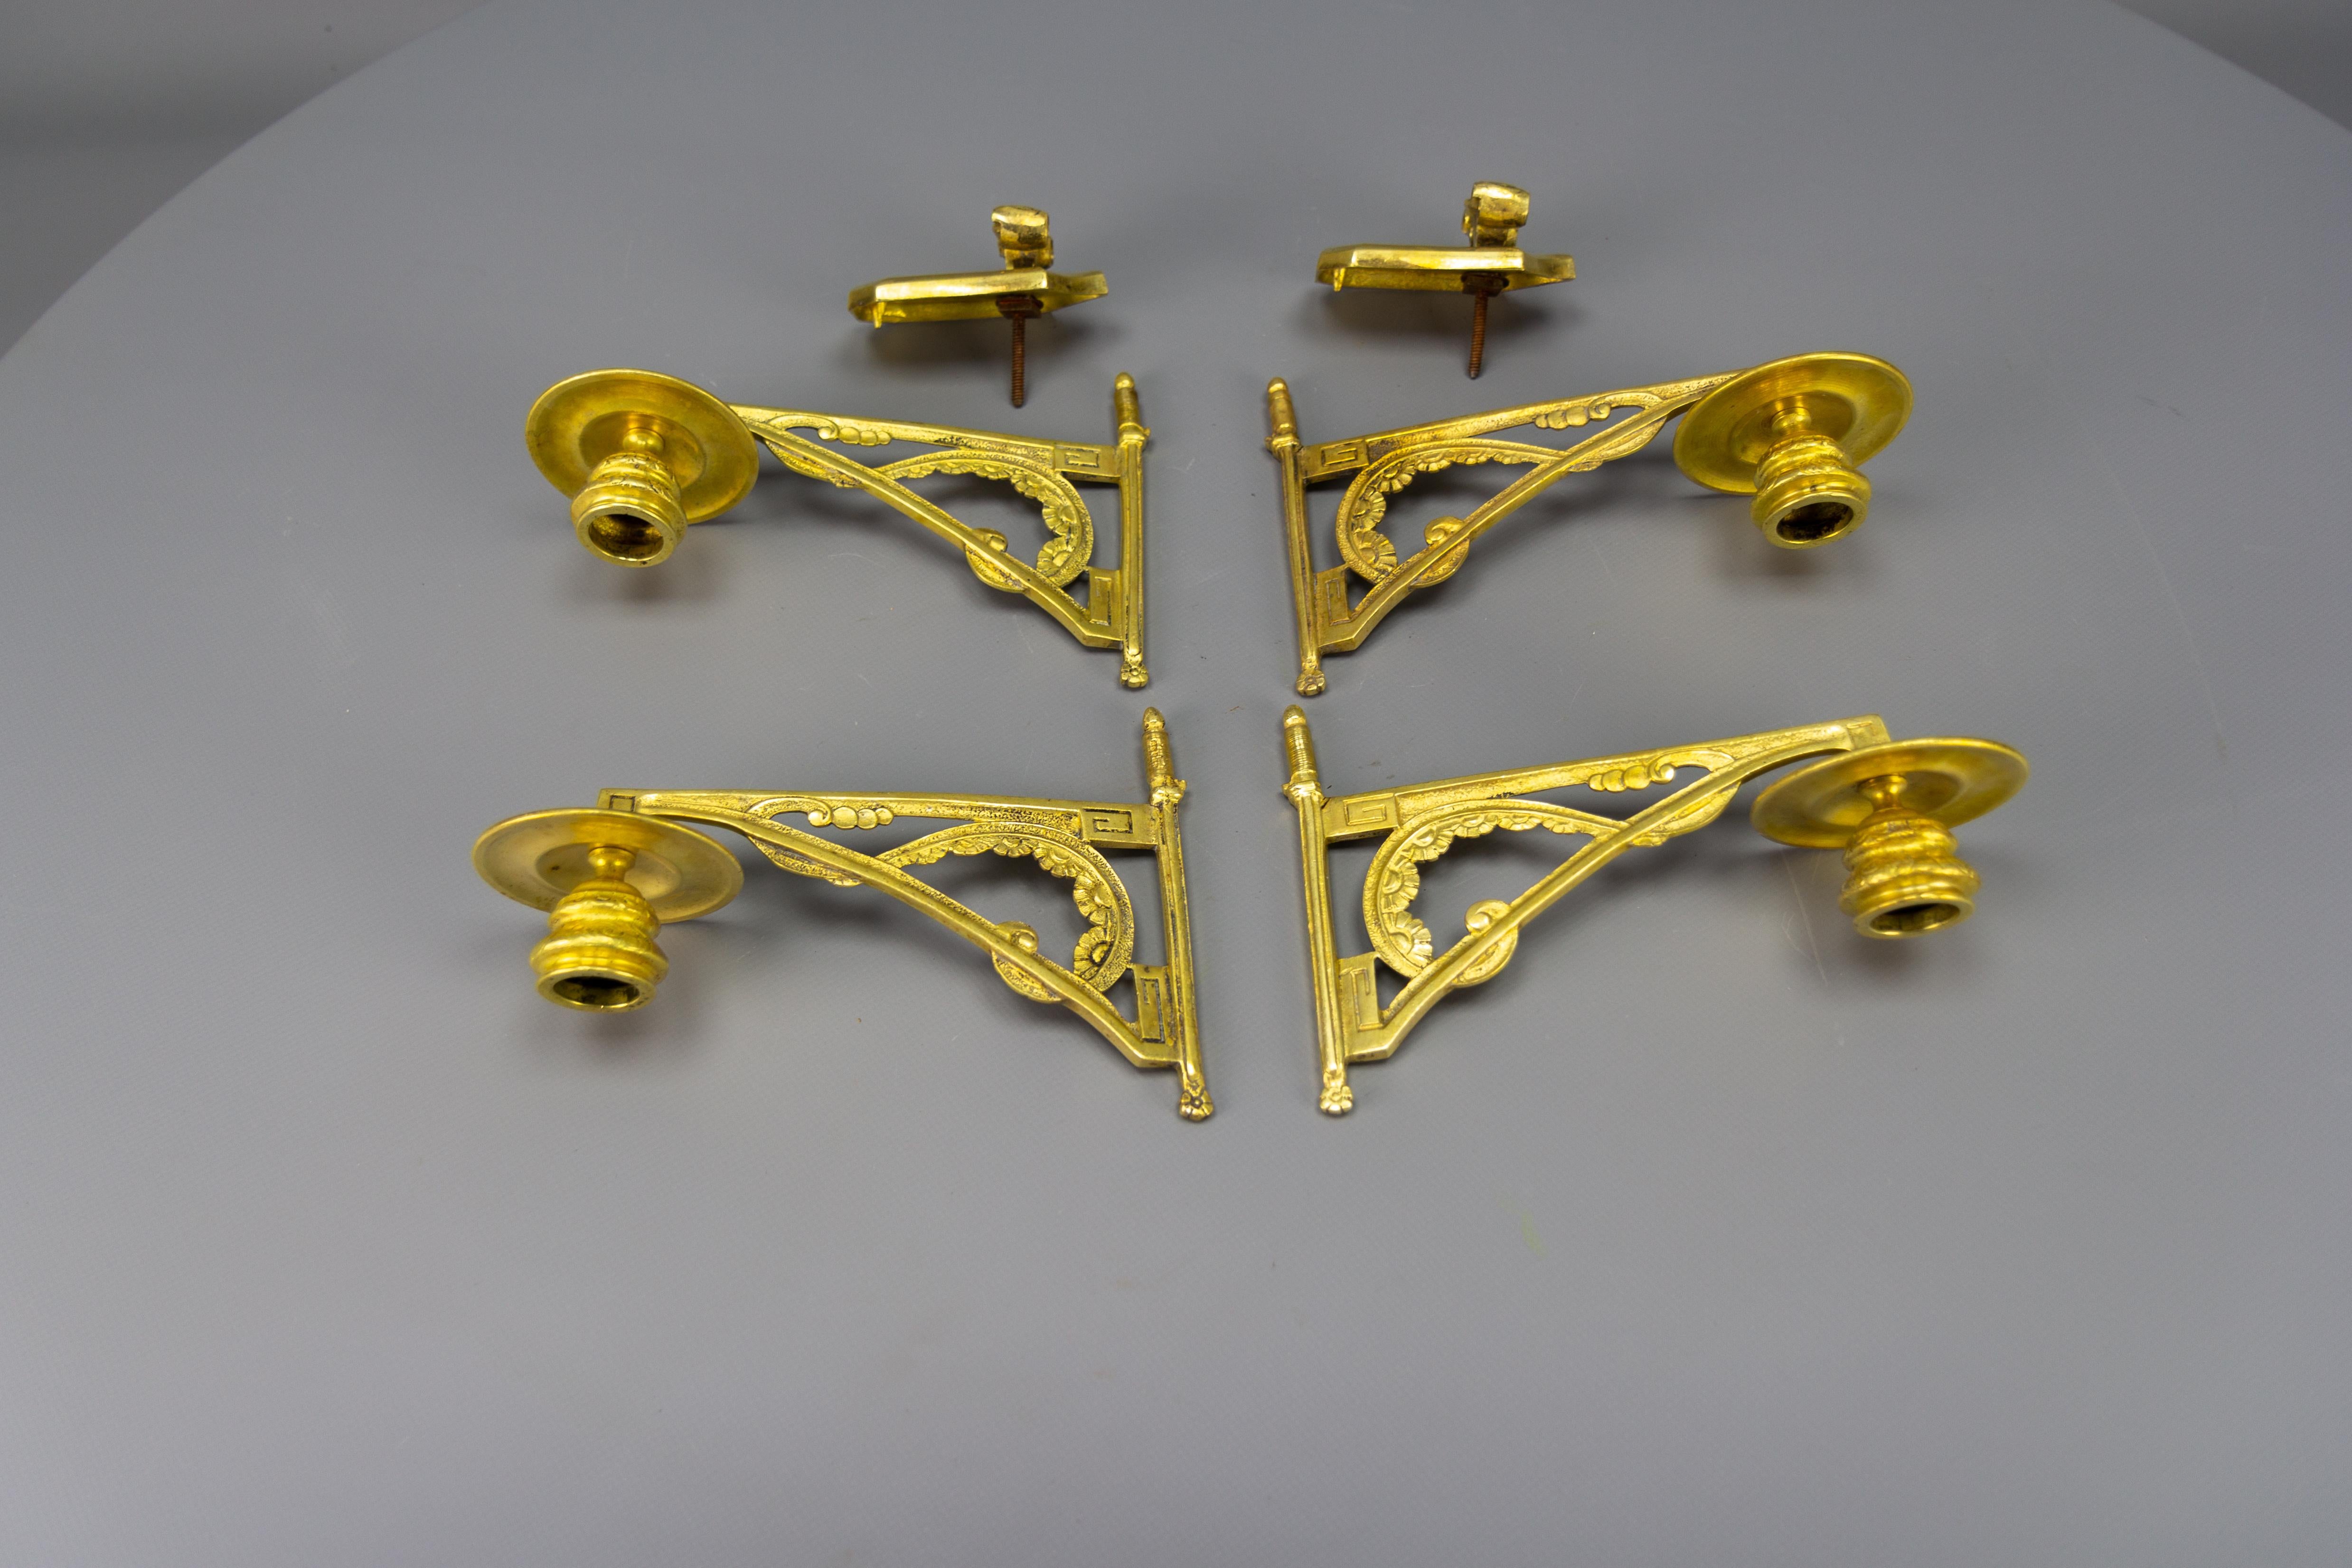 Pair of French Art Deco Brass Twin Arm Piano Candlestick Wall Lights by L. Pinet For Sale 7